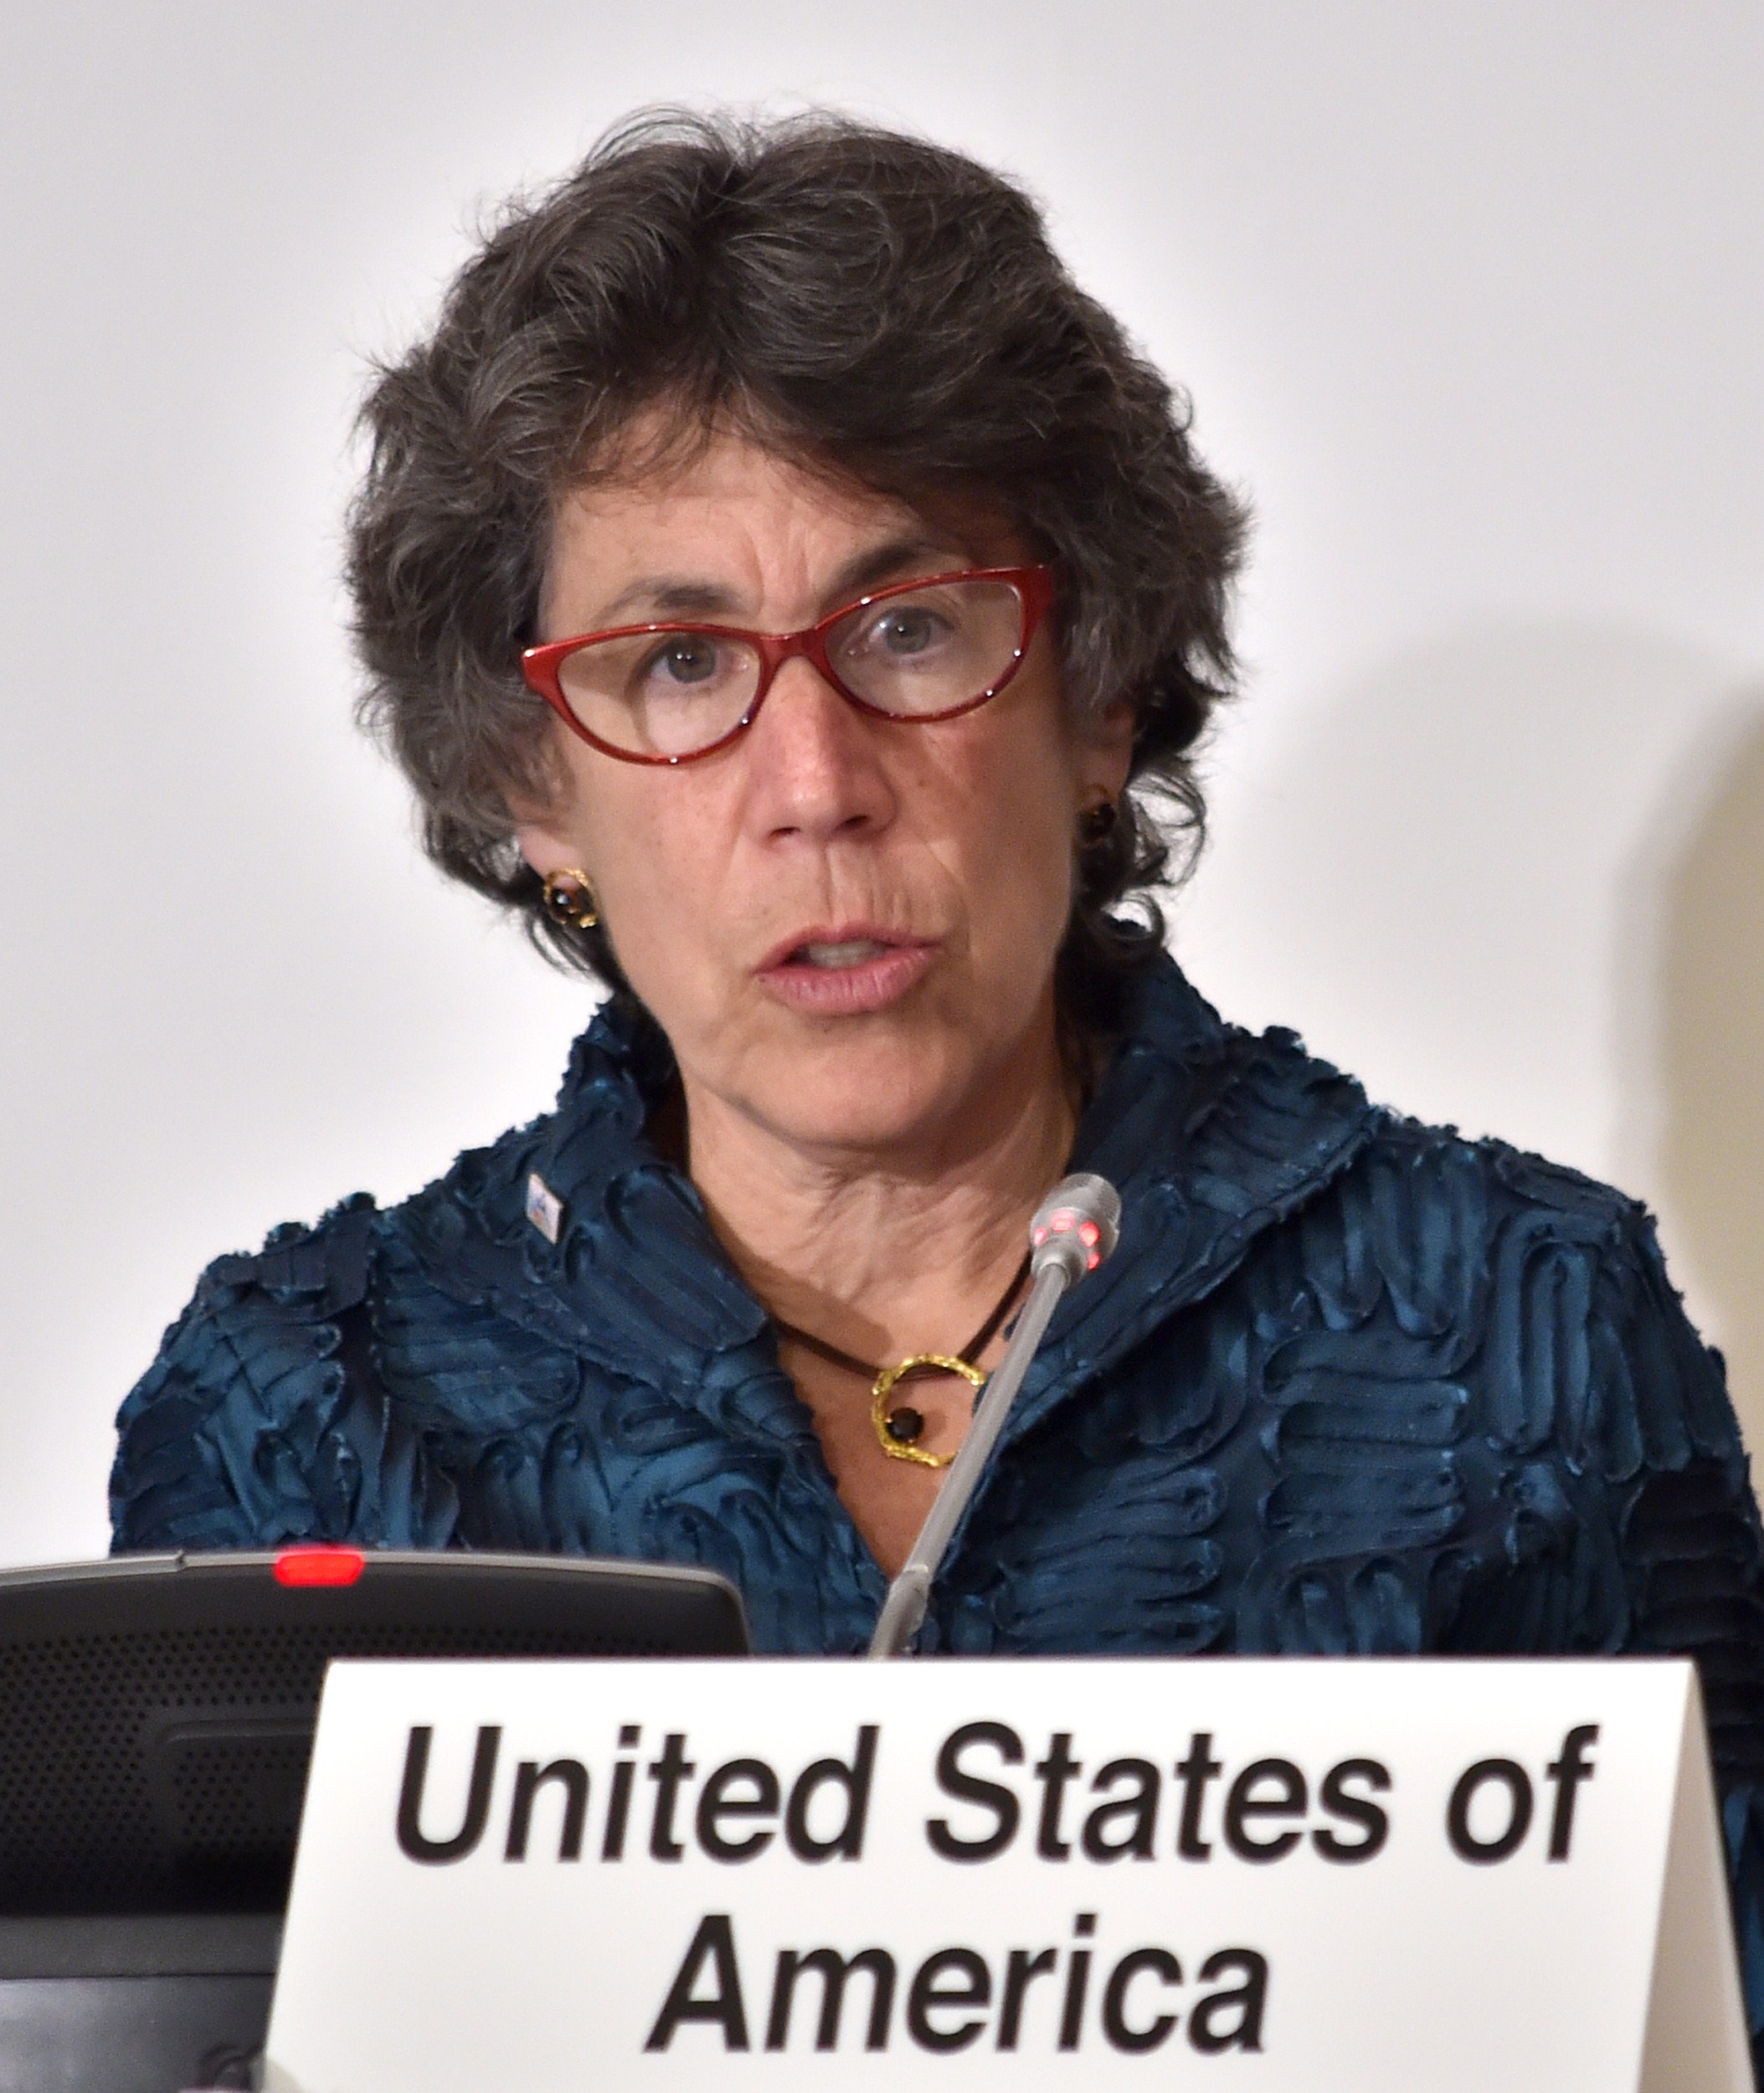 Nicole Lurie, assistant secretary for preparedness and response of the US, speaks during a press conference for the 15th Global Health Security Initiative Ministerial Meeting in Tokyo on Dec. 11, 2014.